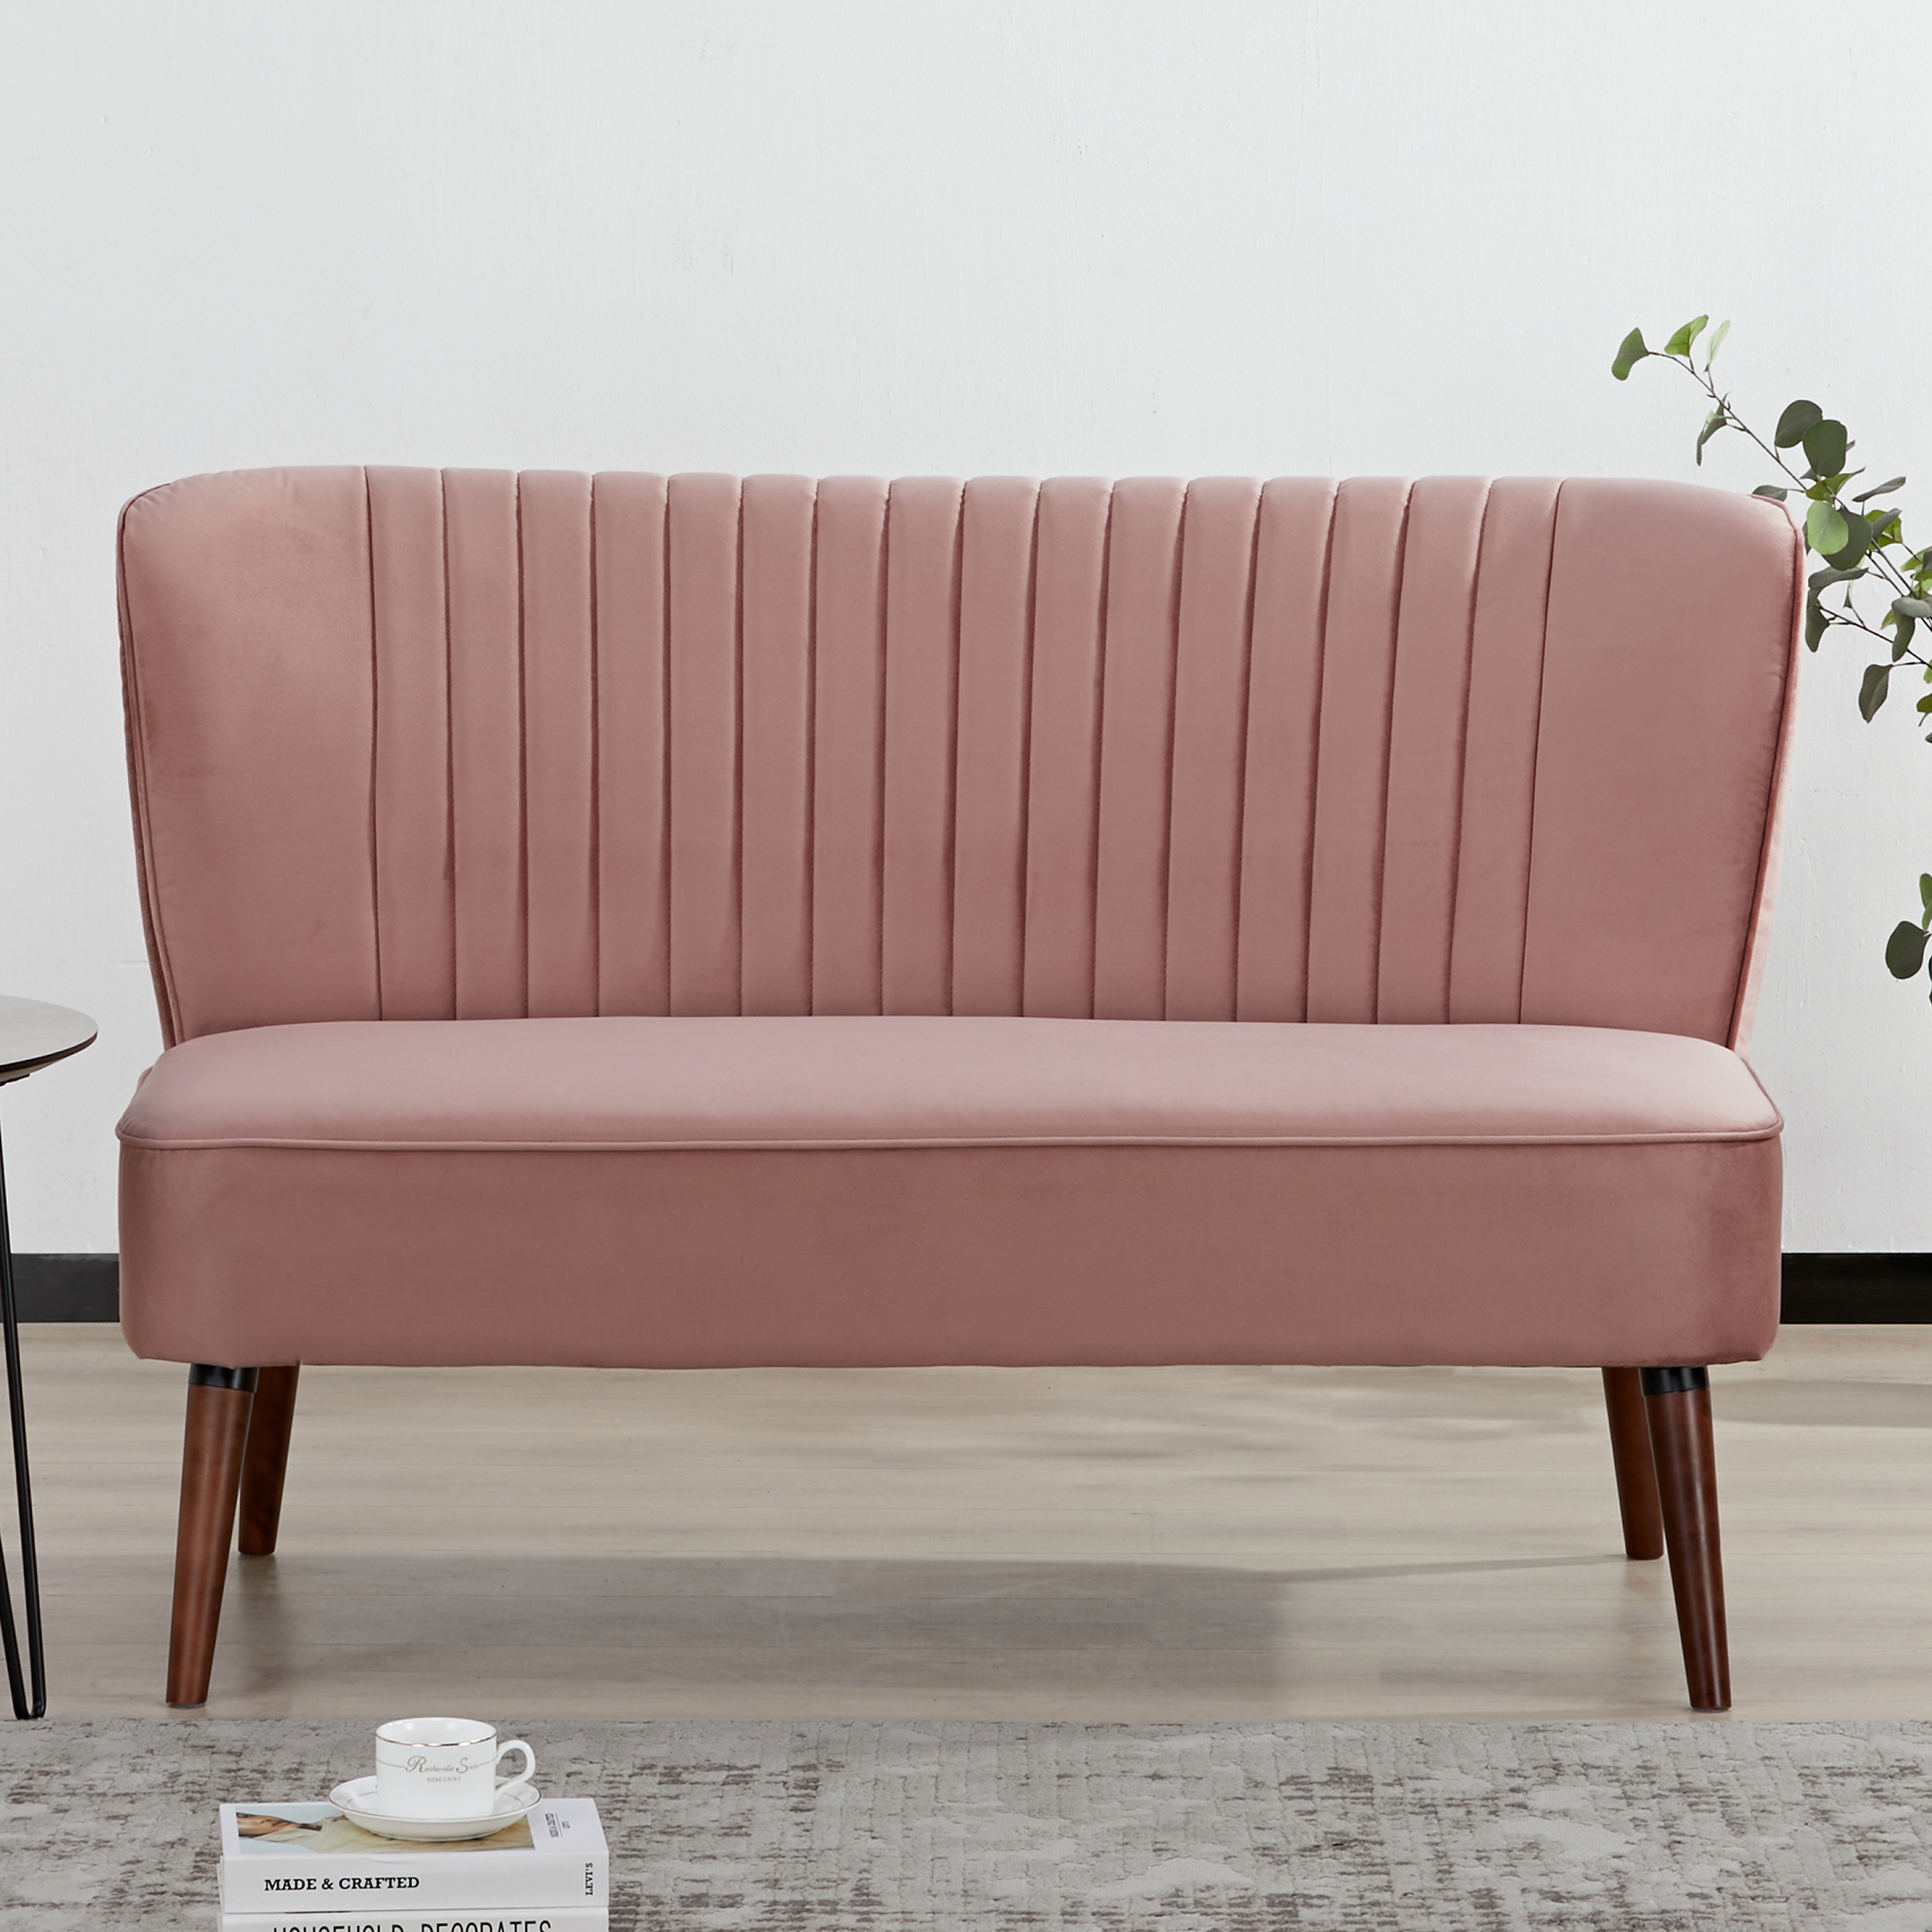 A&D Home Hollywood Mid-century Modern Velvet Tufted Loveseat, Compact 2 person Settee, Pink - image 4 of 9